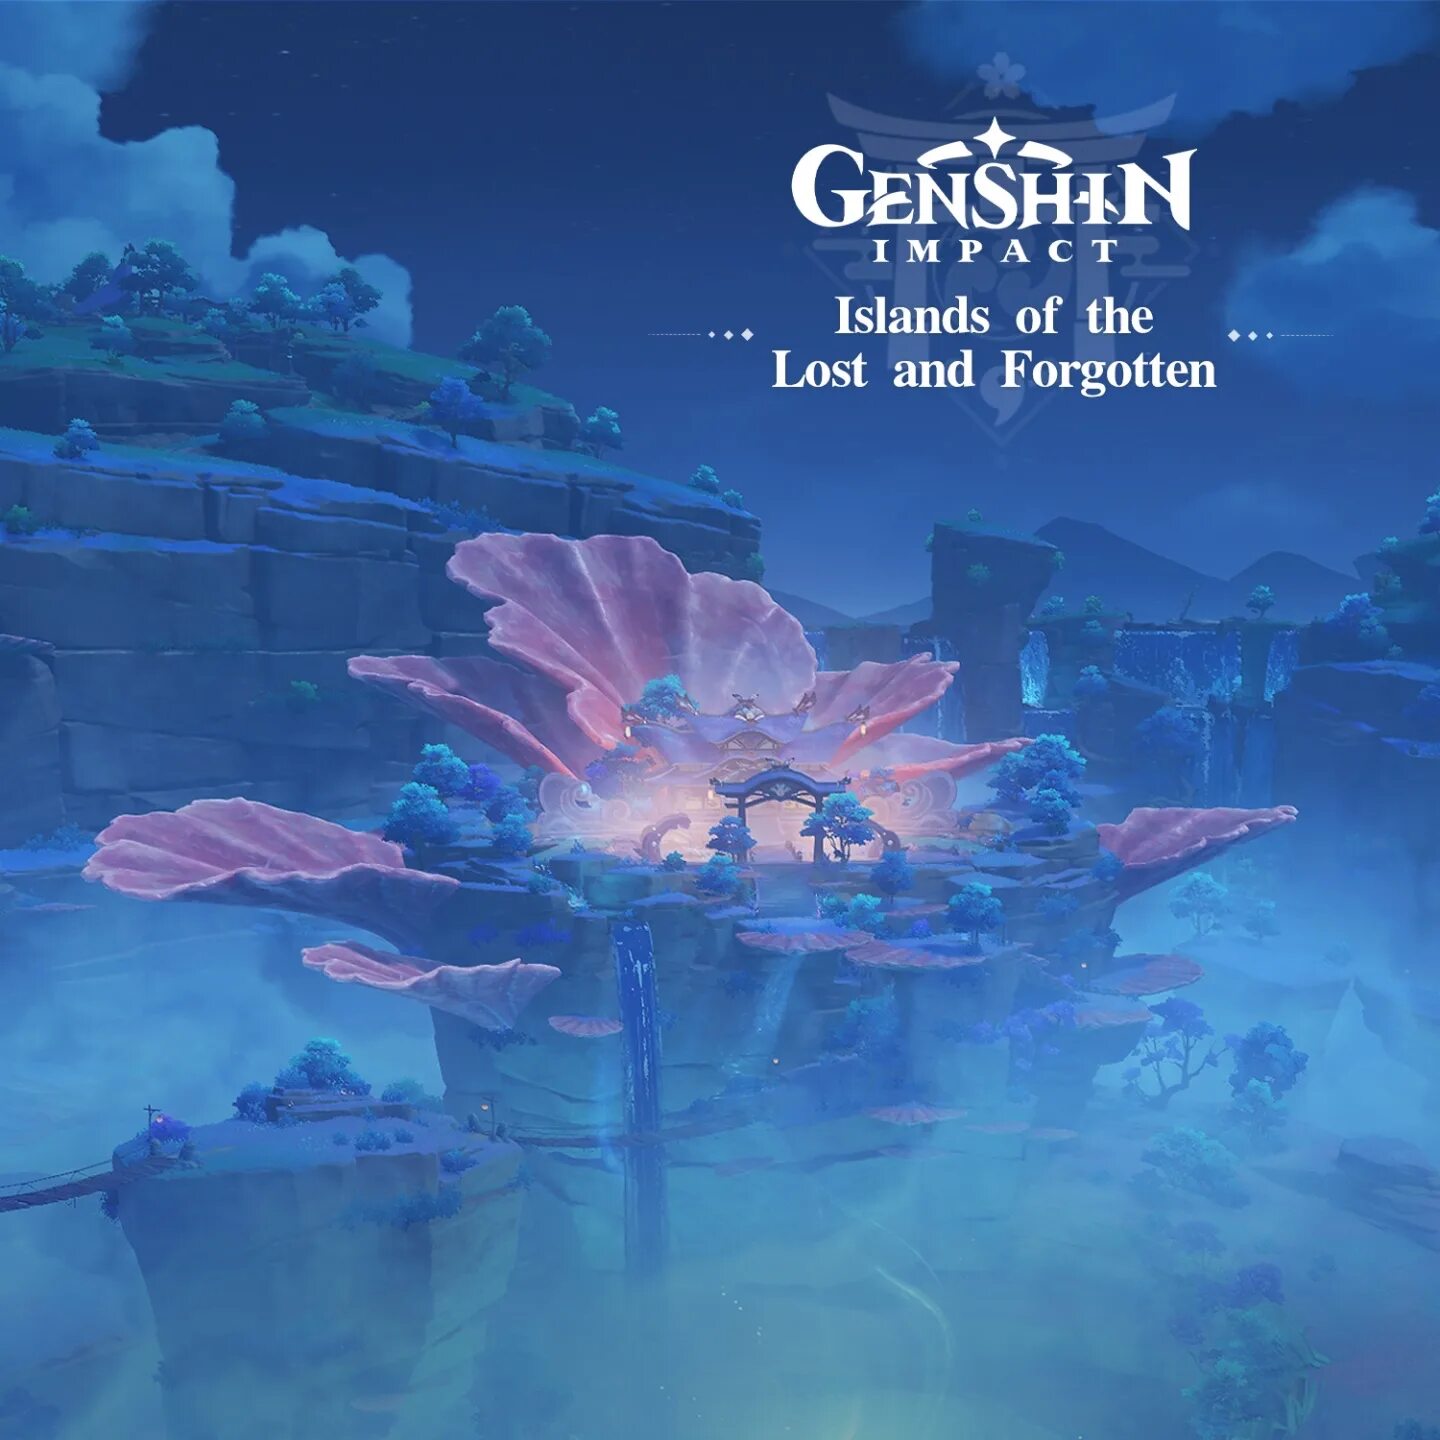 Ost island. Genshin Impact - Islands of the Lost and Forgotten. Lost and Forgotten игра. Клерк Чжао Genshin Impact. Genshin Impact - Islands of the Lost and Forgotten Original game Soundtrack.